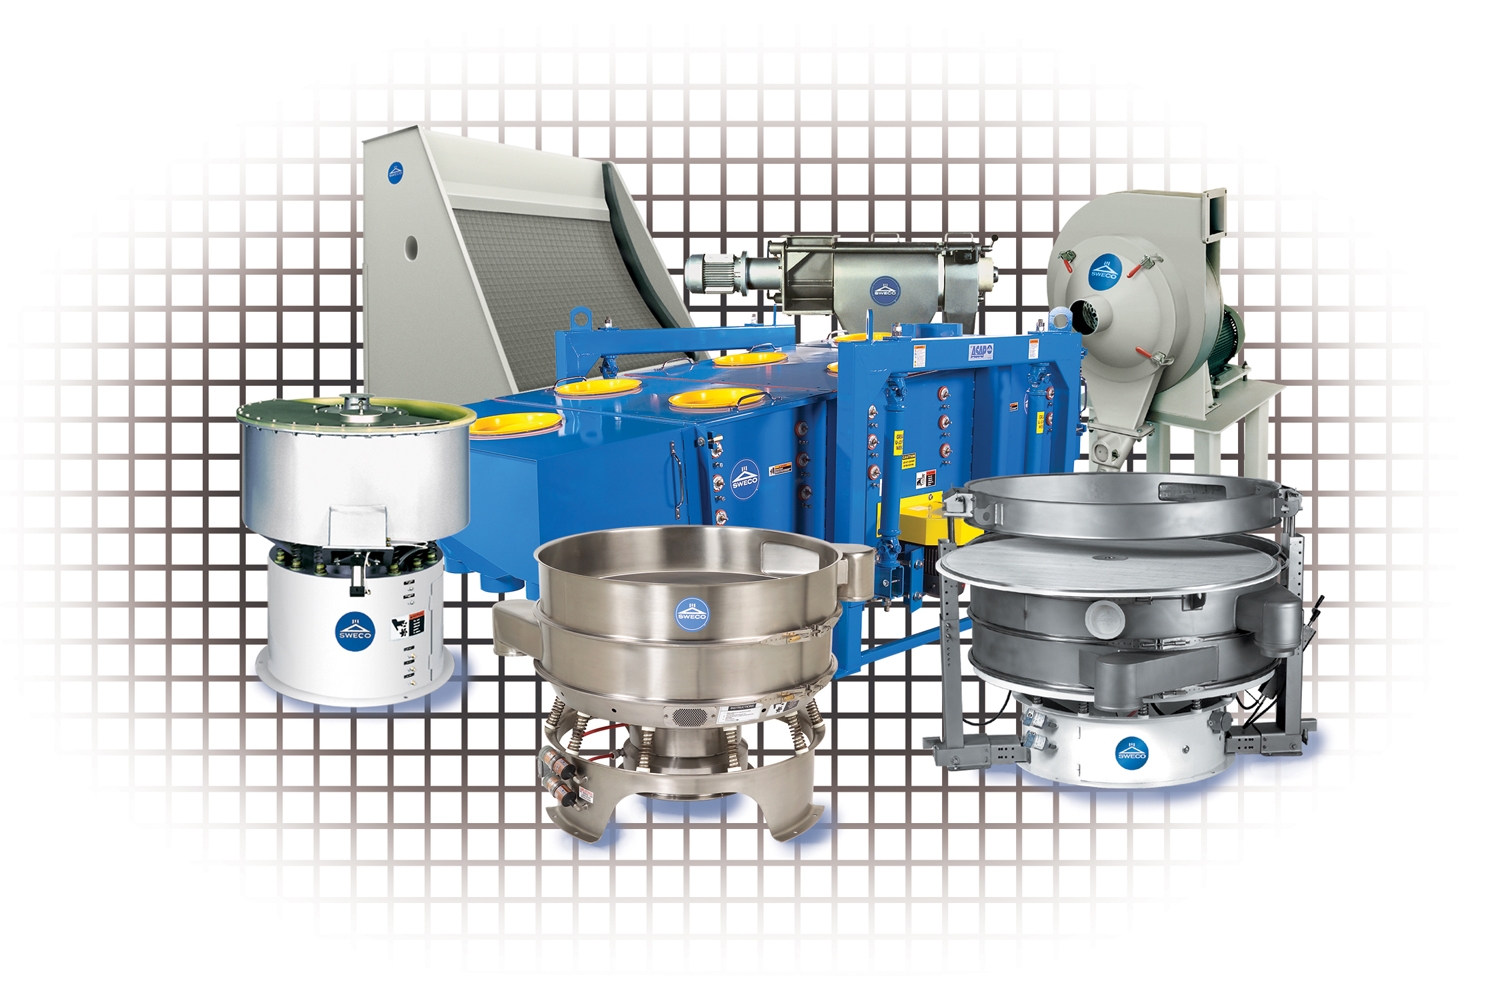 We manufacture multiple lines of equipment used in the oilfield, chemical, food and beverage, minerals, pharmaceutical and many other industries.